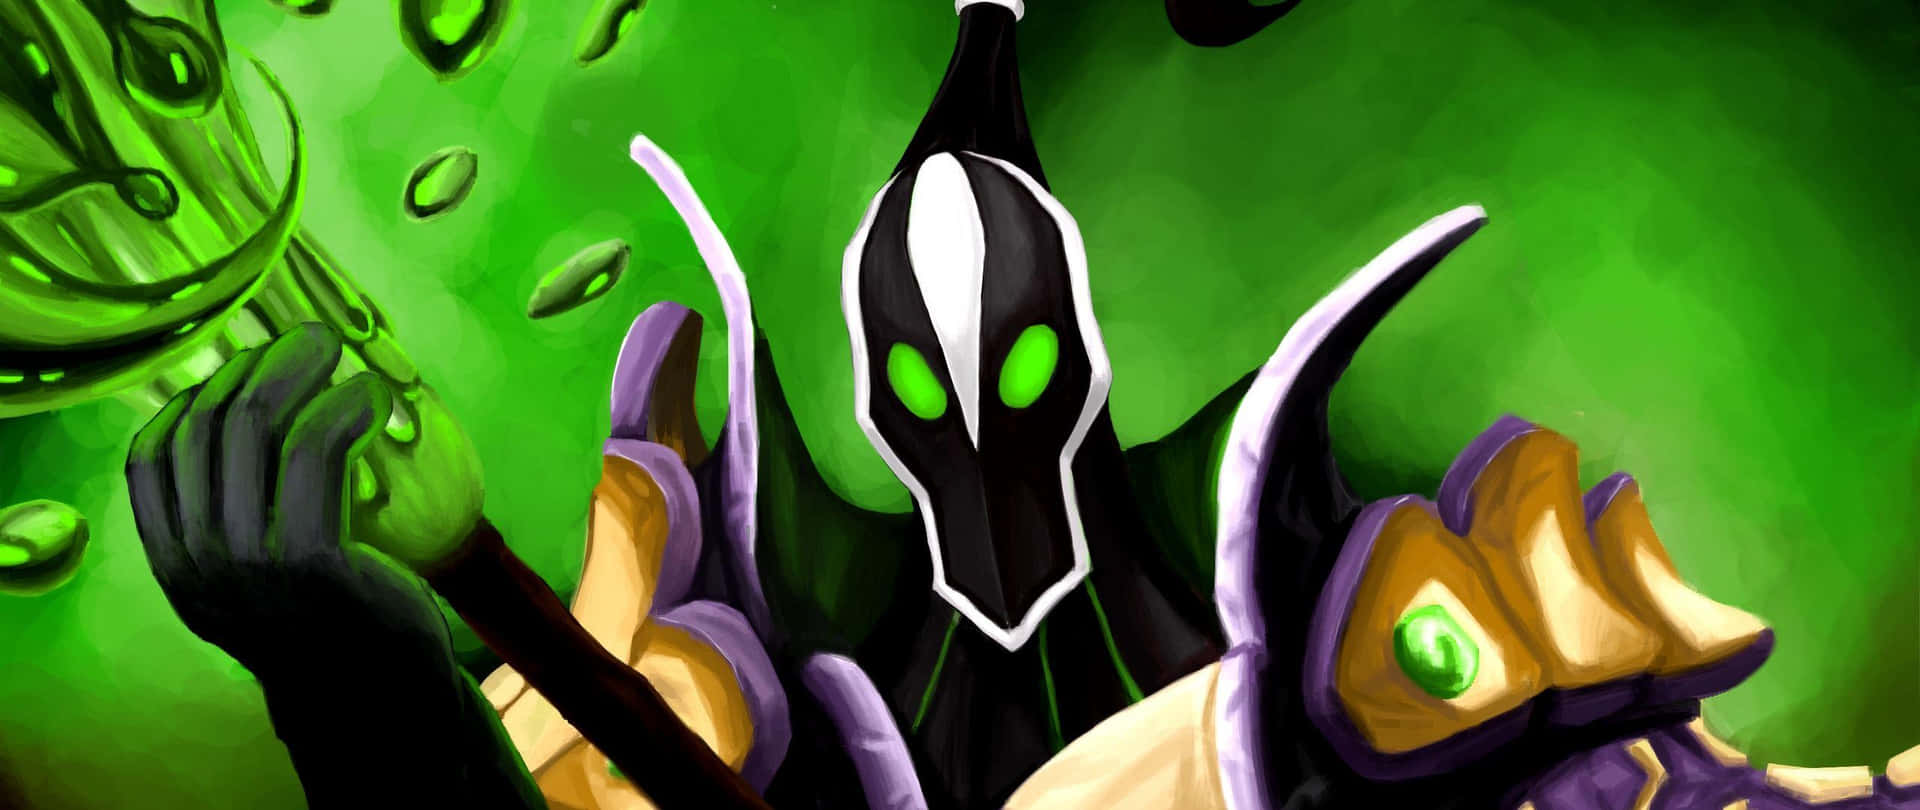 Mystical Rubick conjuring an arcane spell in the realm of Dota 2. Wallpaper